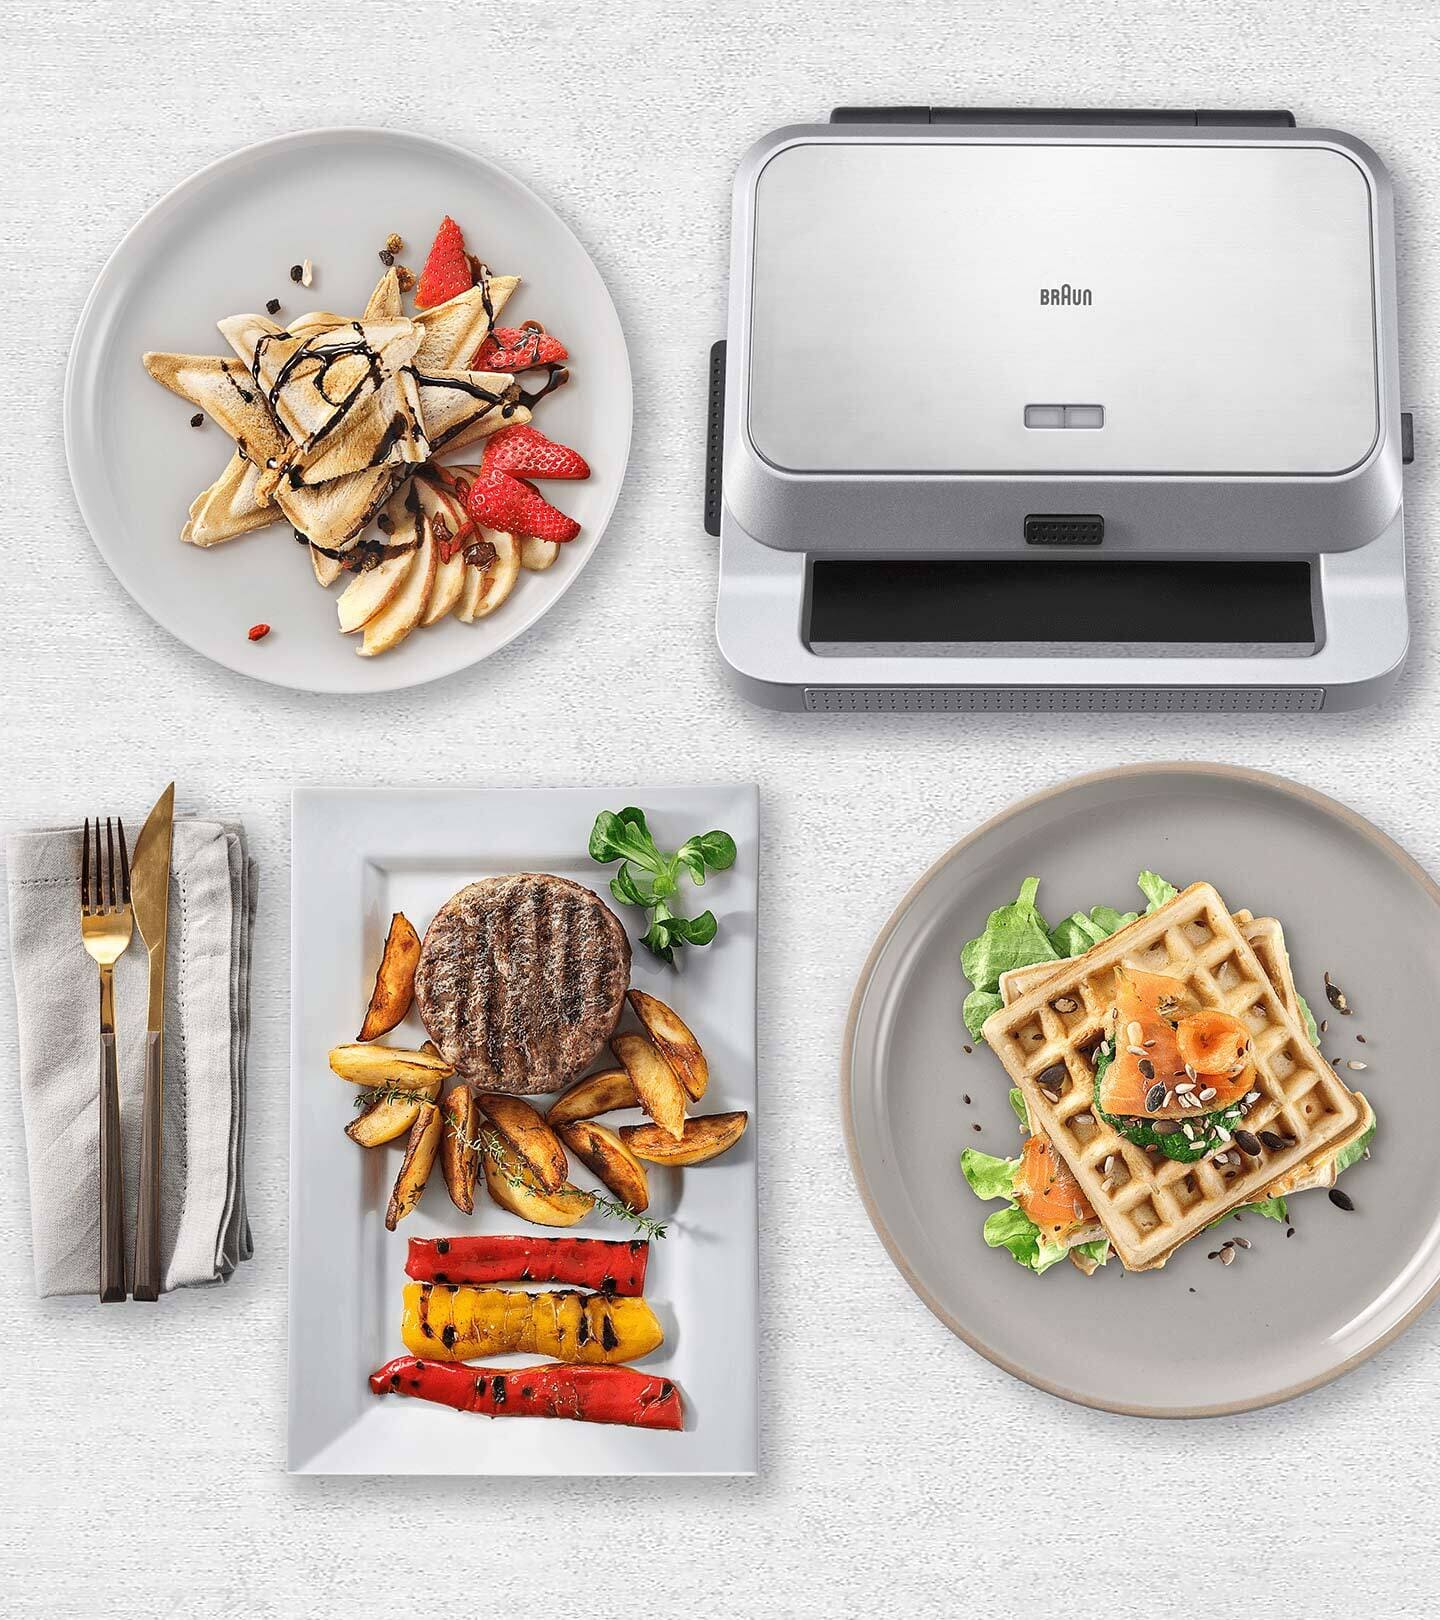 Braun SnackMaker 5 and plates with sandwitches, waffles and freshly grilled vegetables.